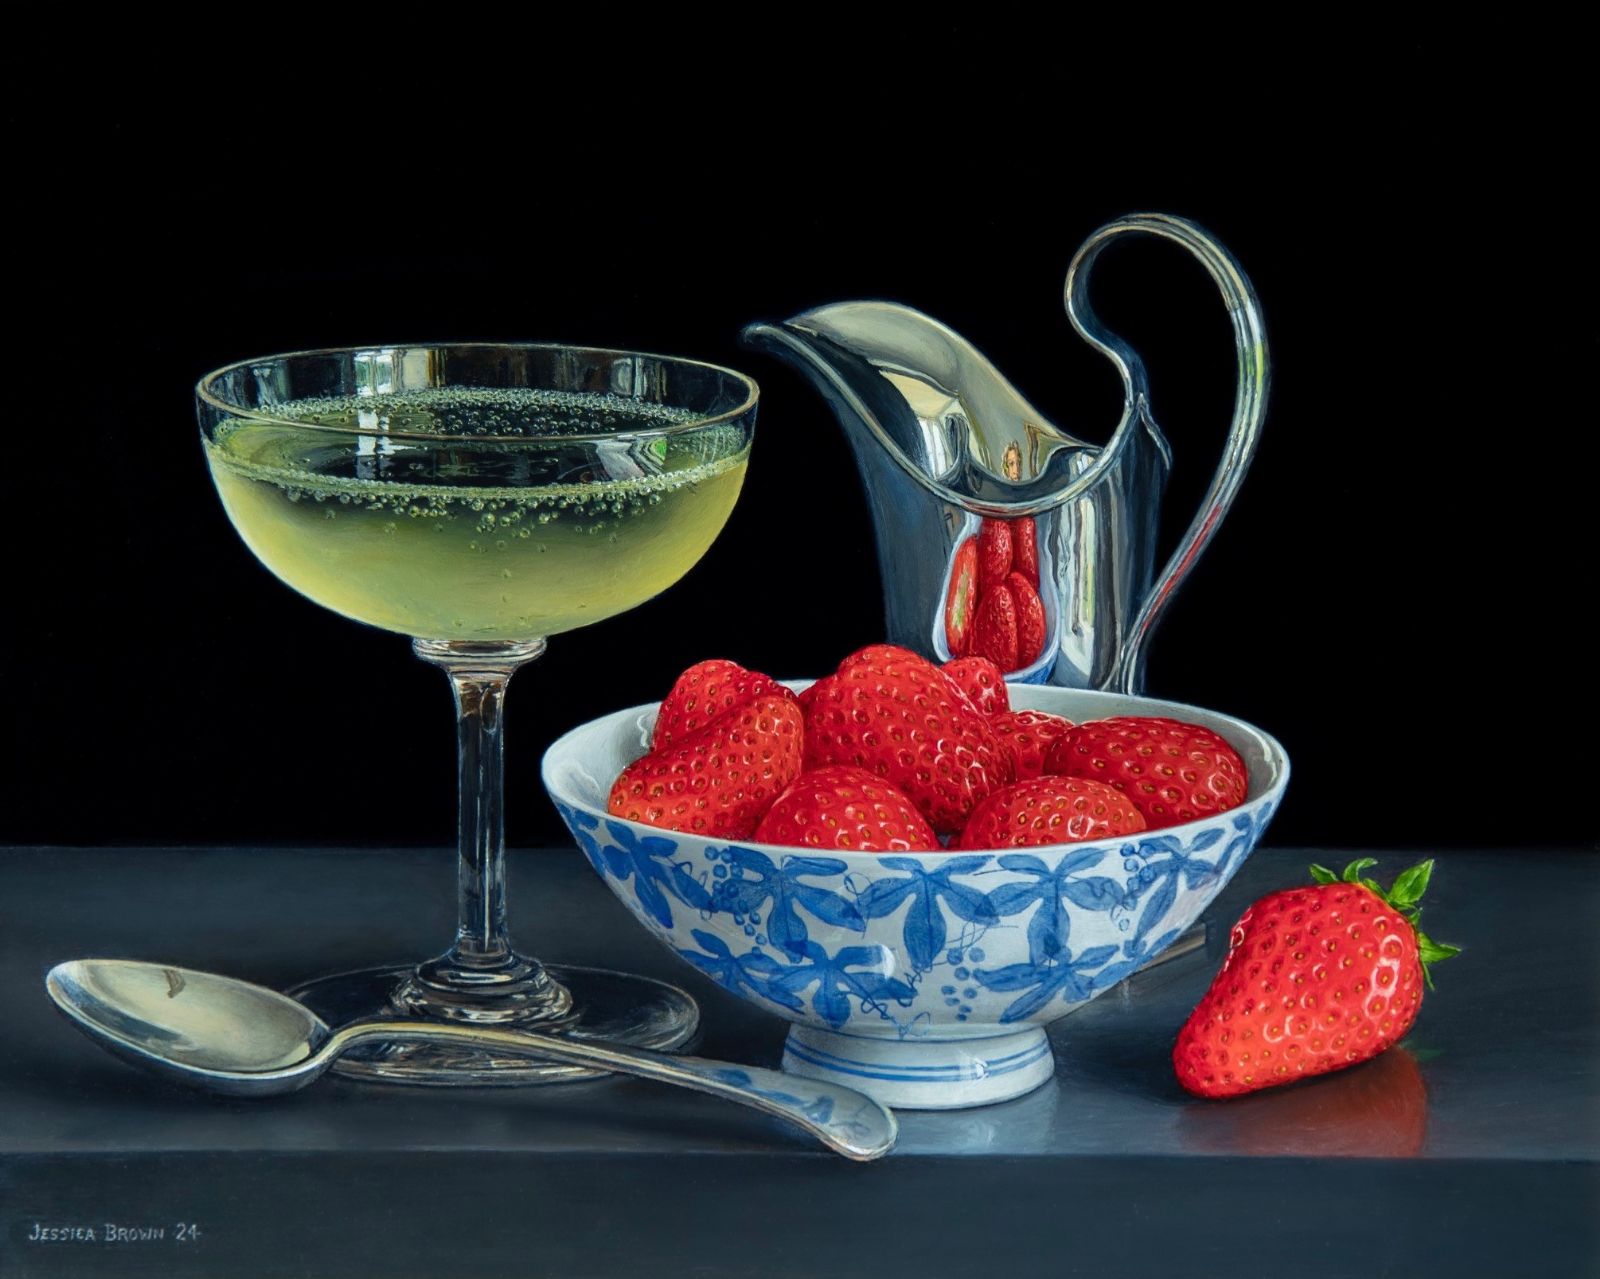 Jessica Brown - Still Life with Silver Cream Jug, Strawberries and Champagne